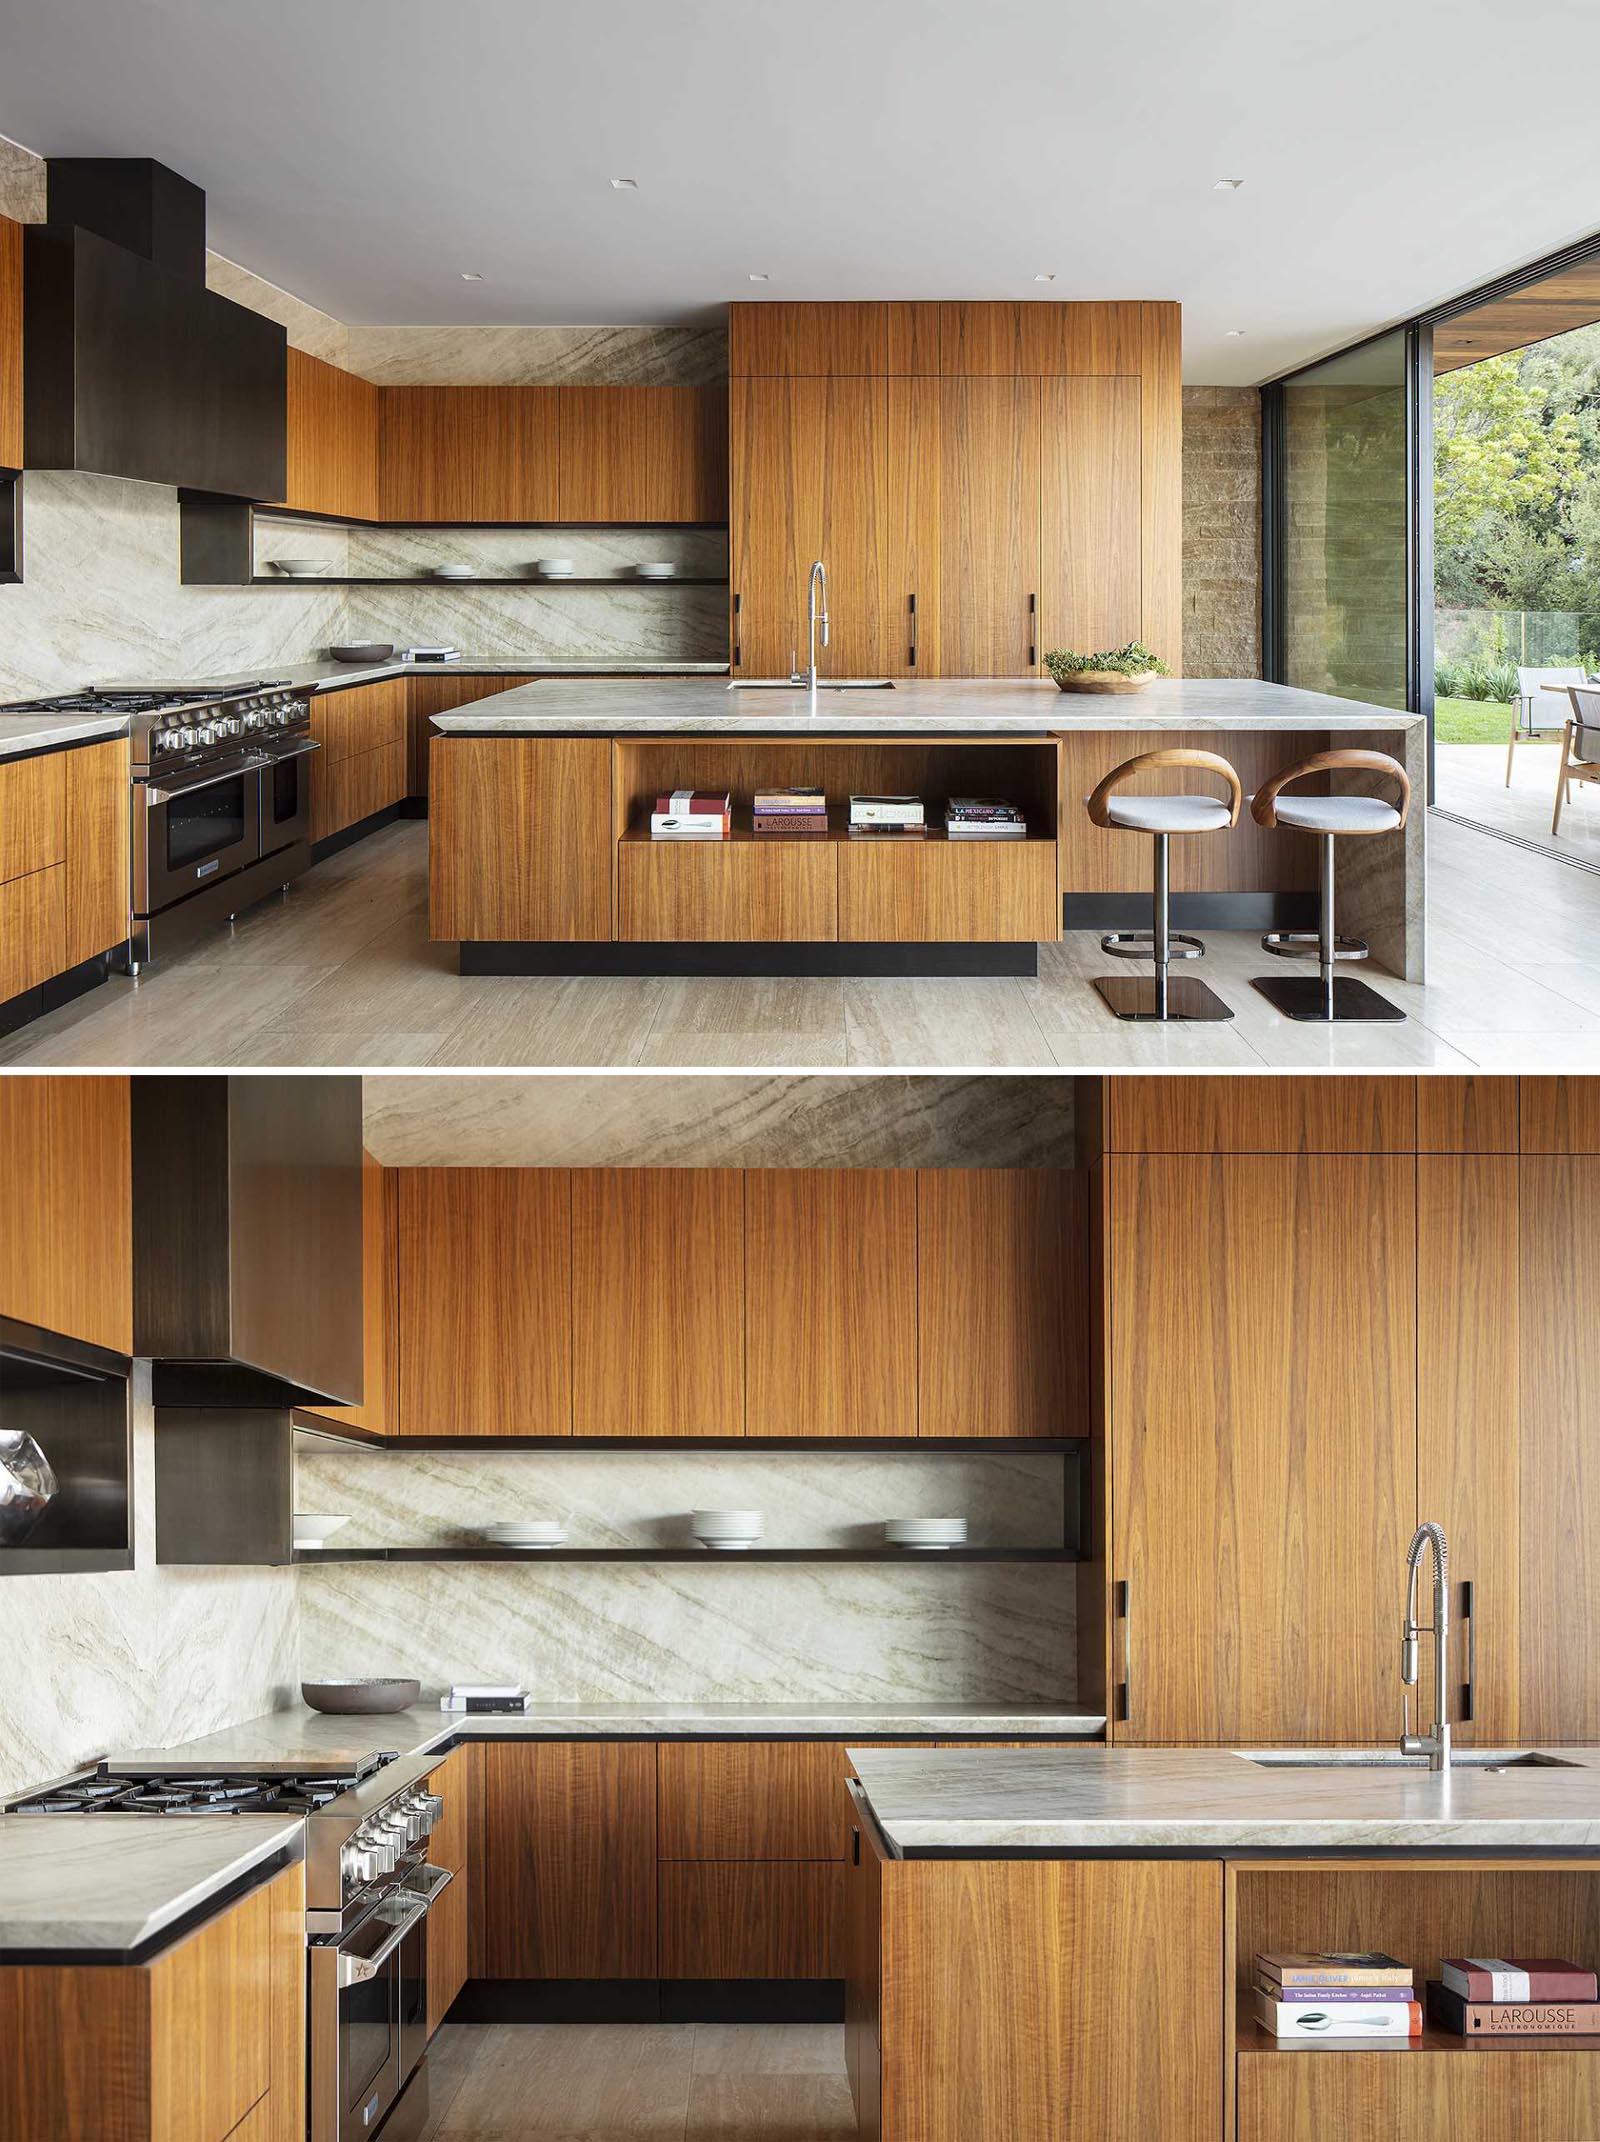 This modern kitchen has a large island with seating, minimalist wood cabinets, and some integrated appliances